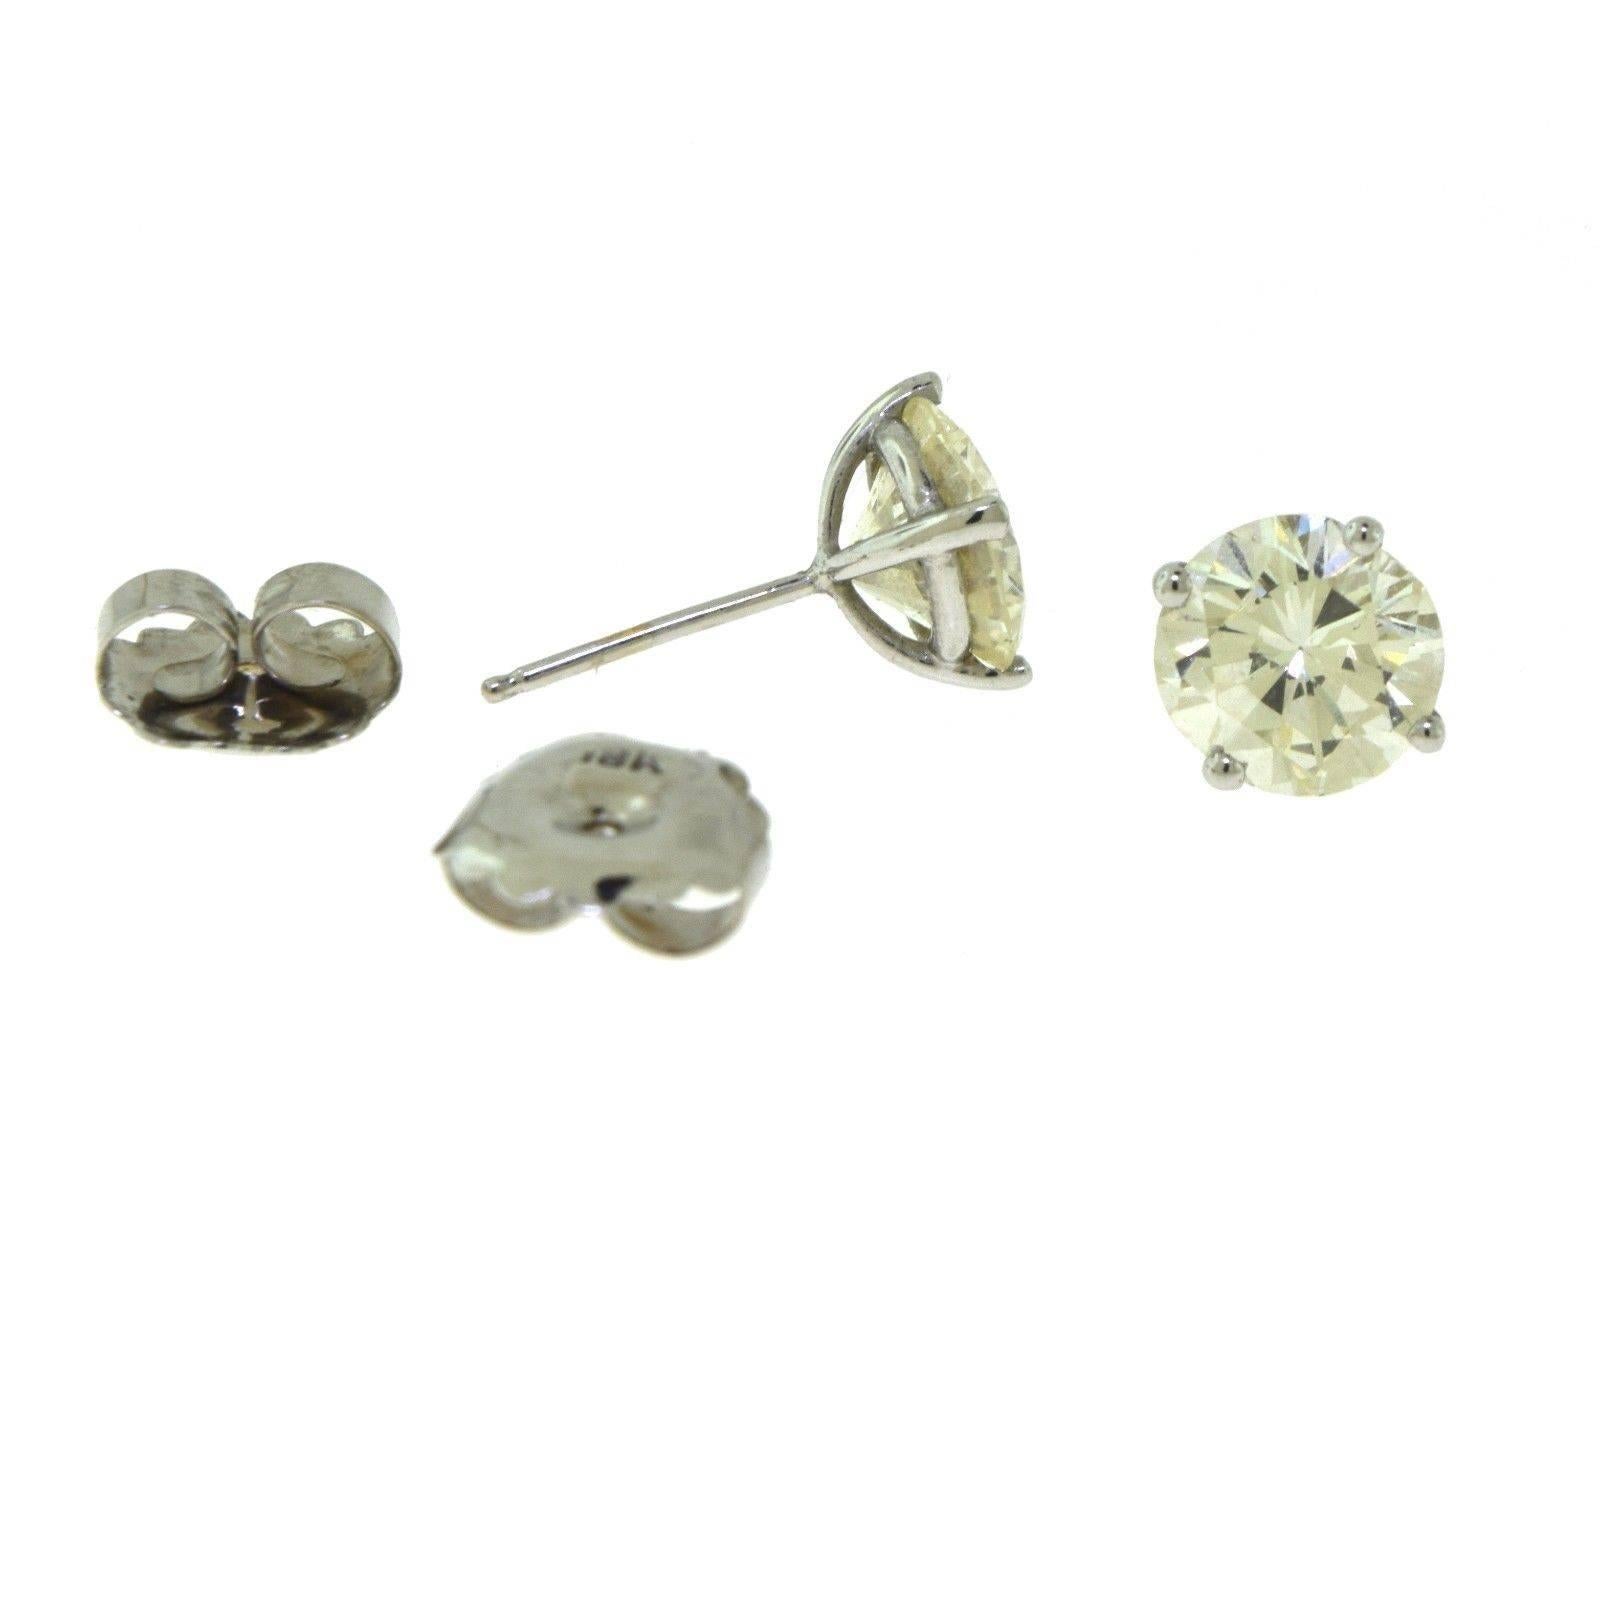 Round Cut Round Brilliant Cut Diamond Stud Earrings in 18k White Gold, 4.86 TCW For Sale